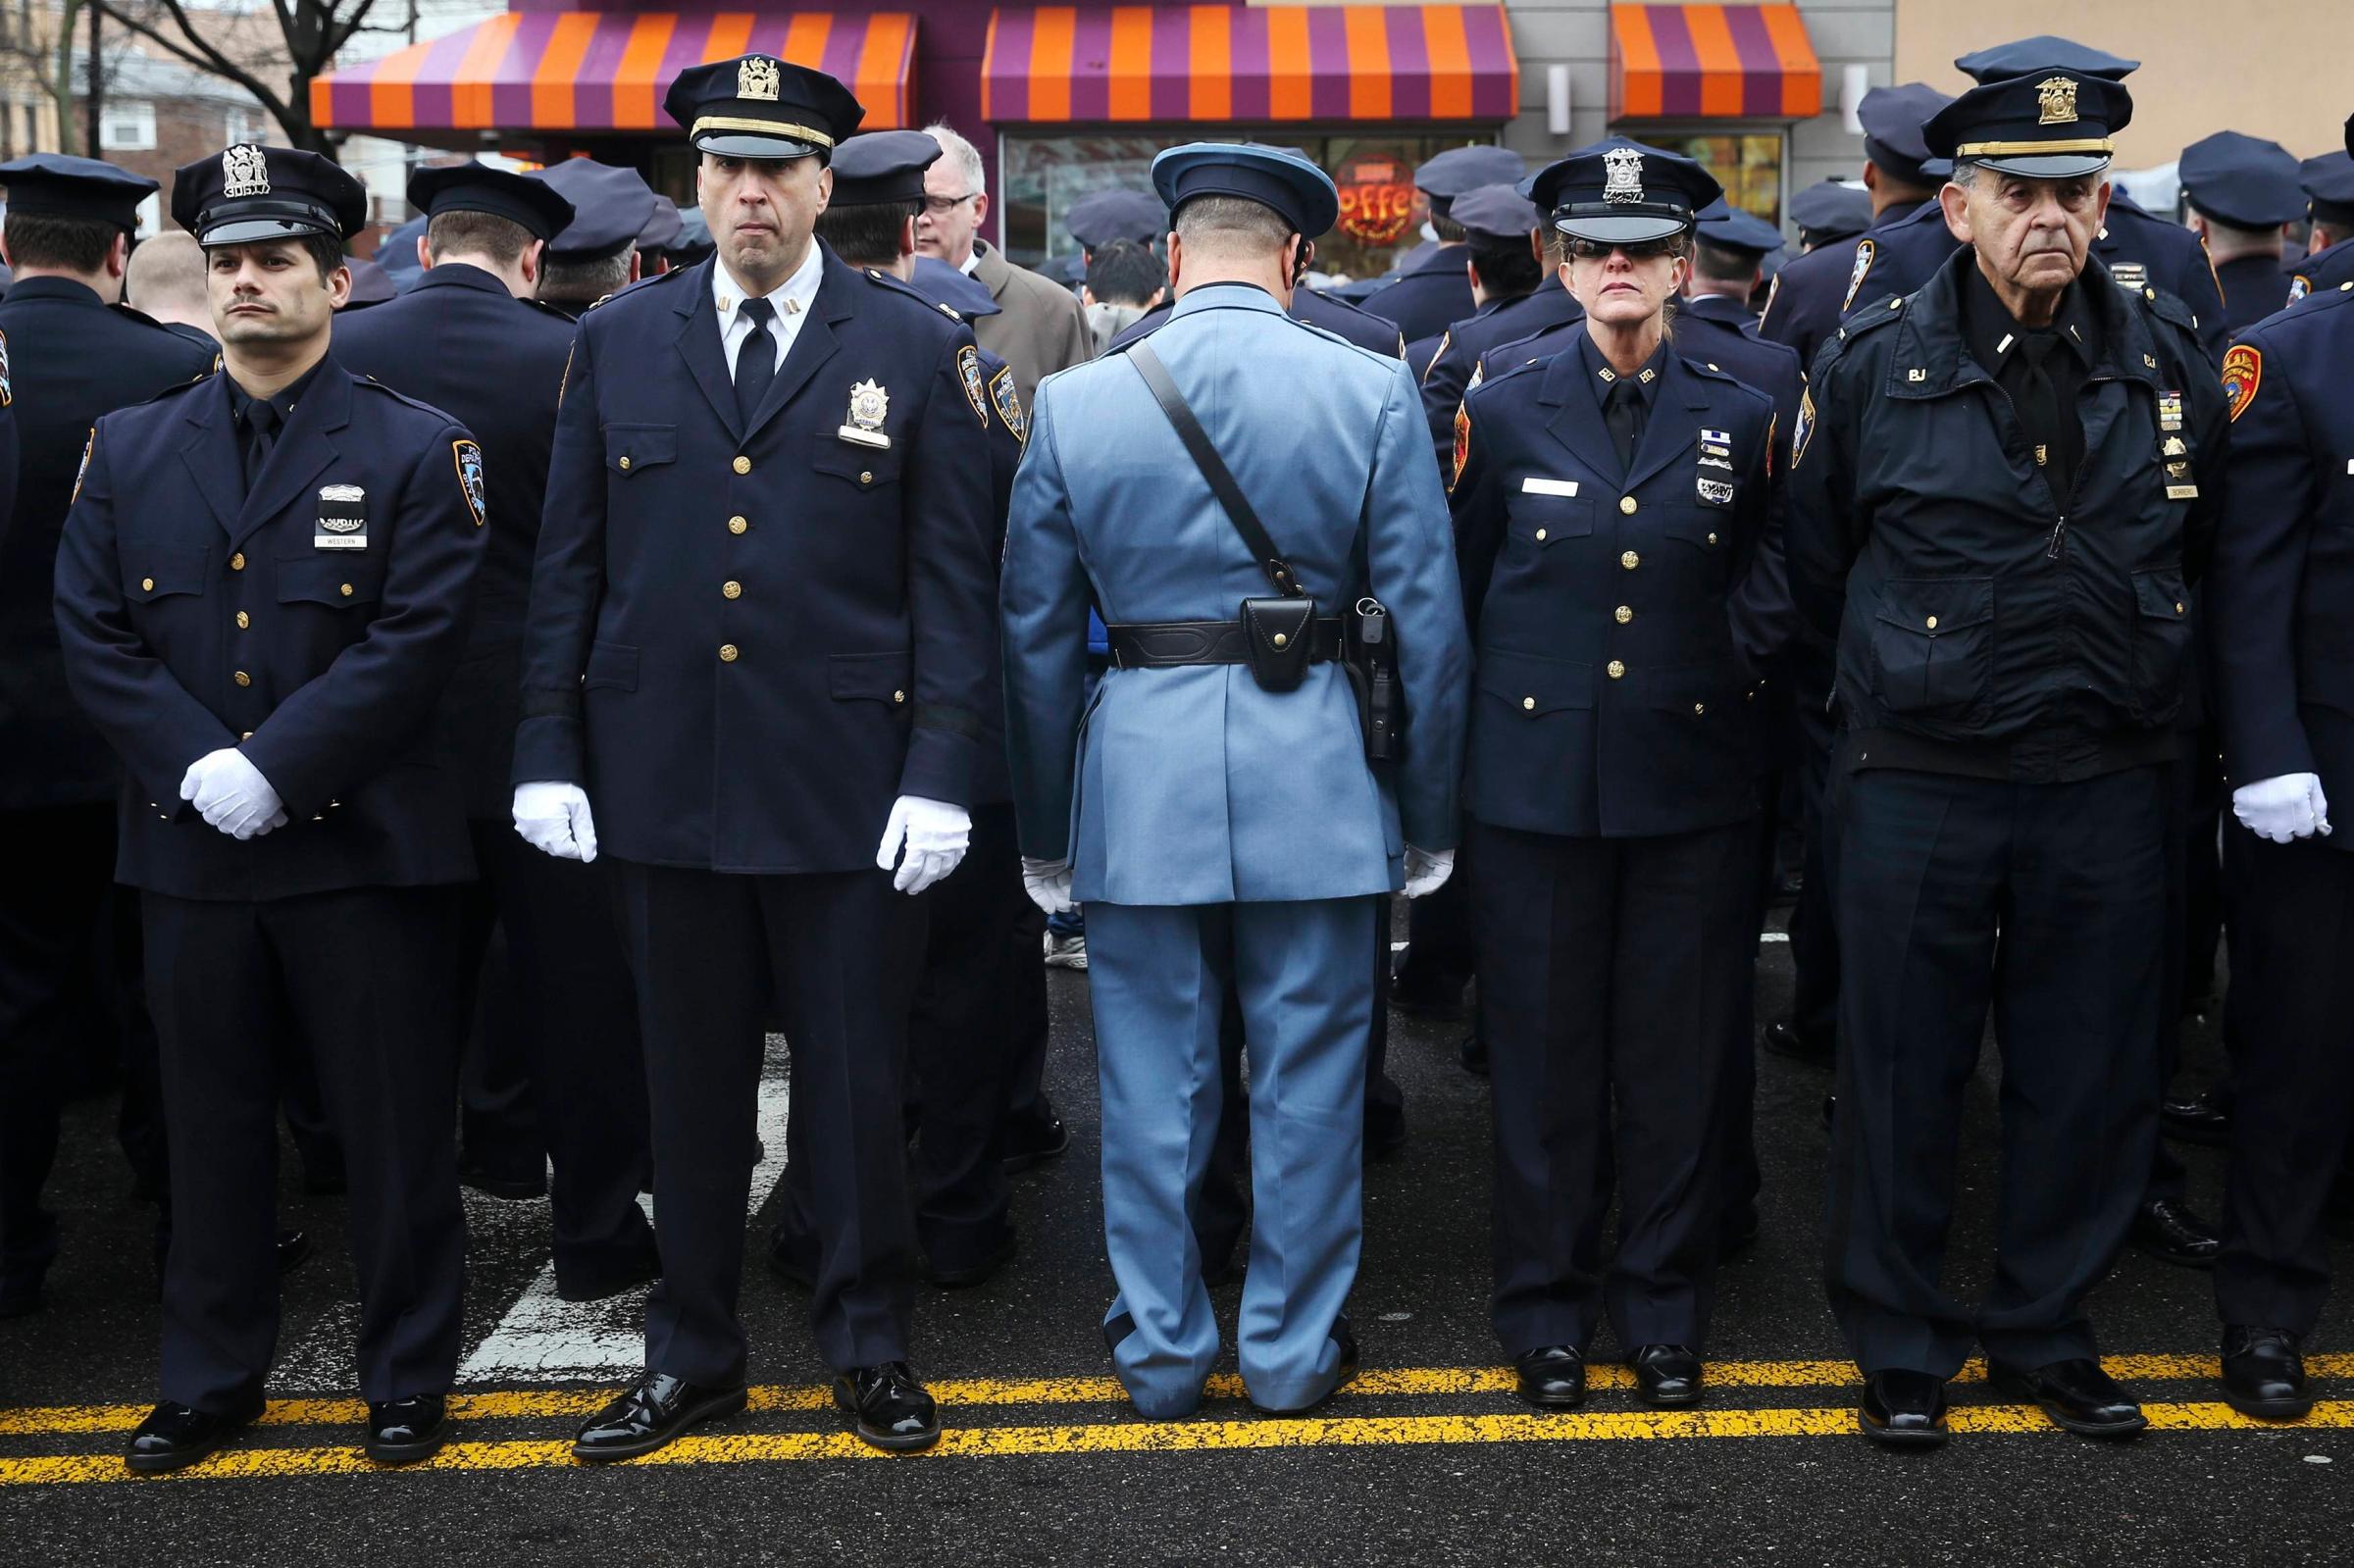 Law enforcement officers stand, with some turning their backs, as New York City Mayor Bill de Blasio speaks on a monitor outside the funeral for NYPD officer Wenjian Liu in the Brooklyn borough of New York